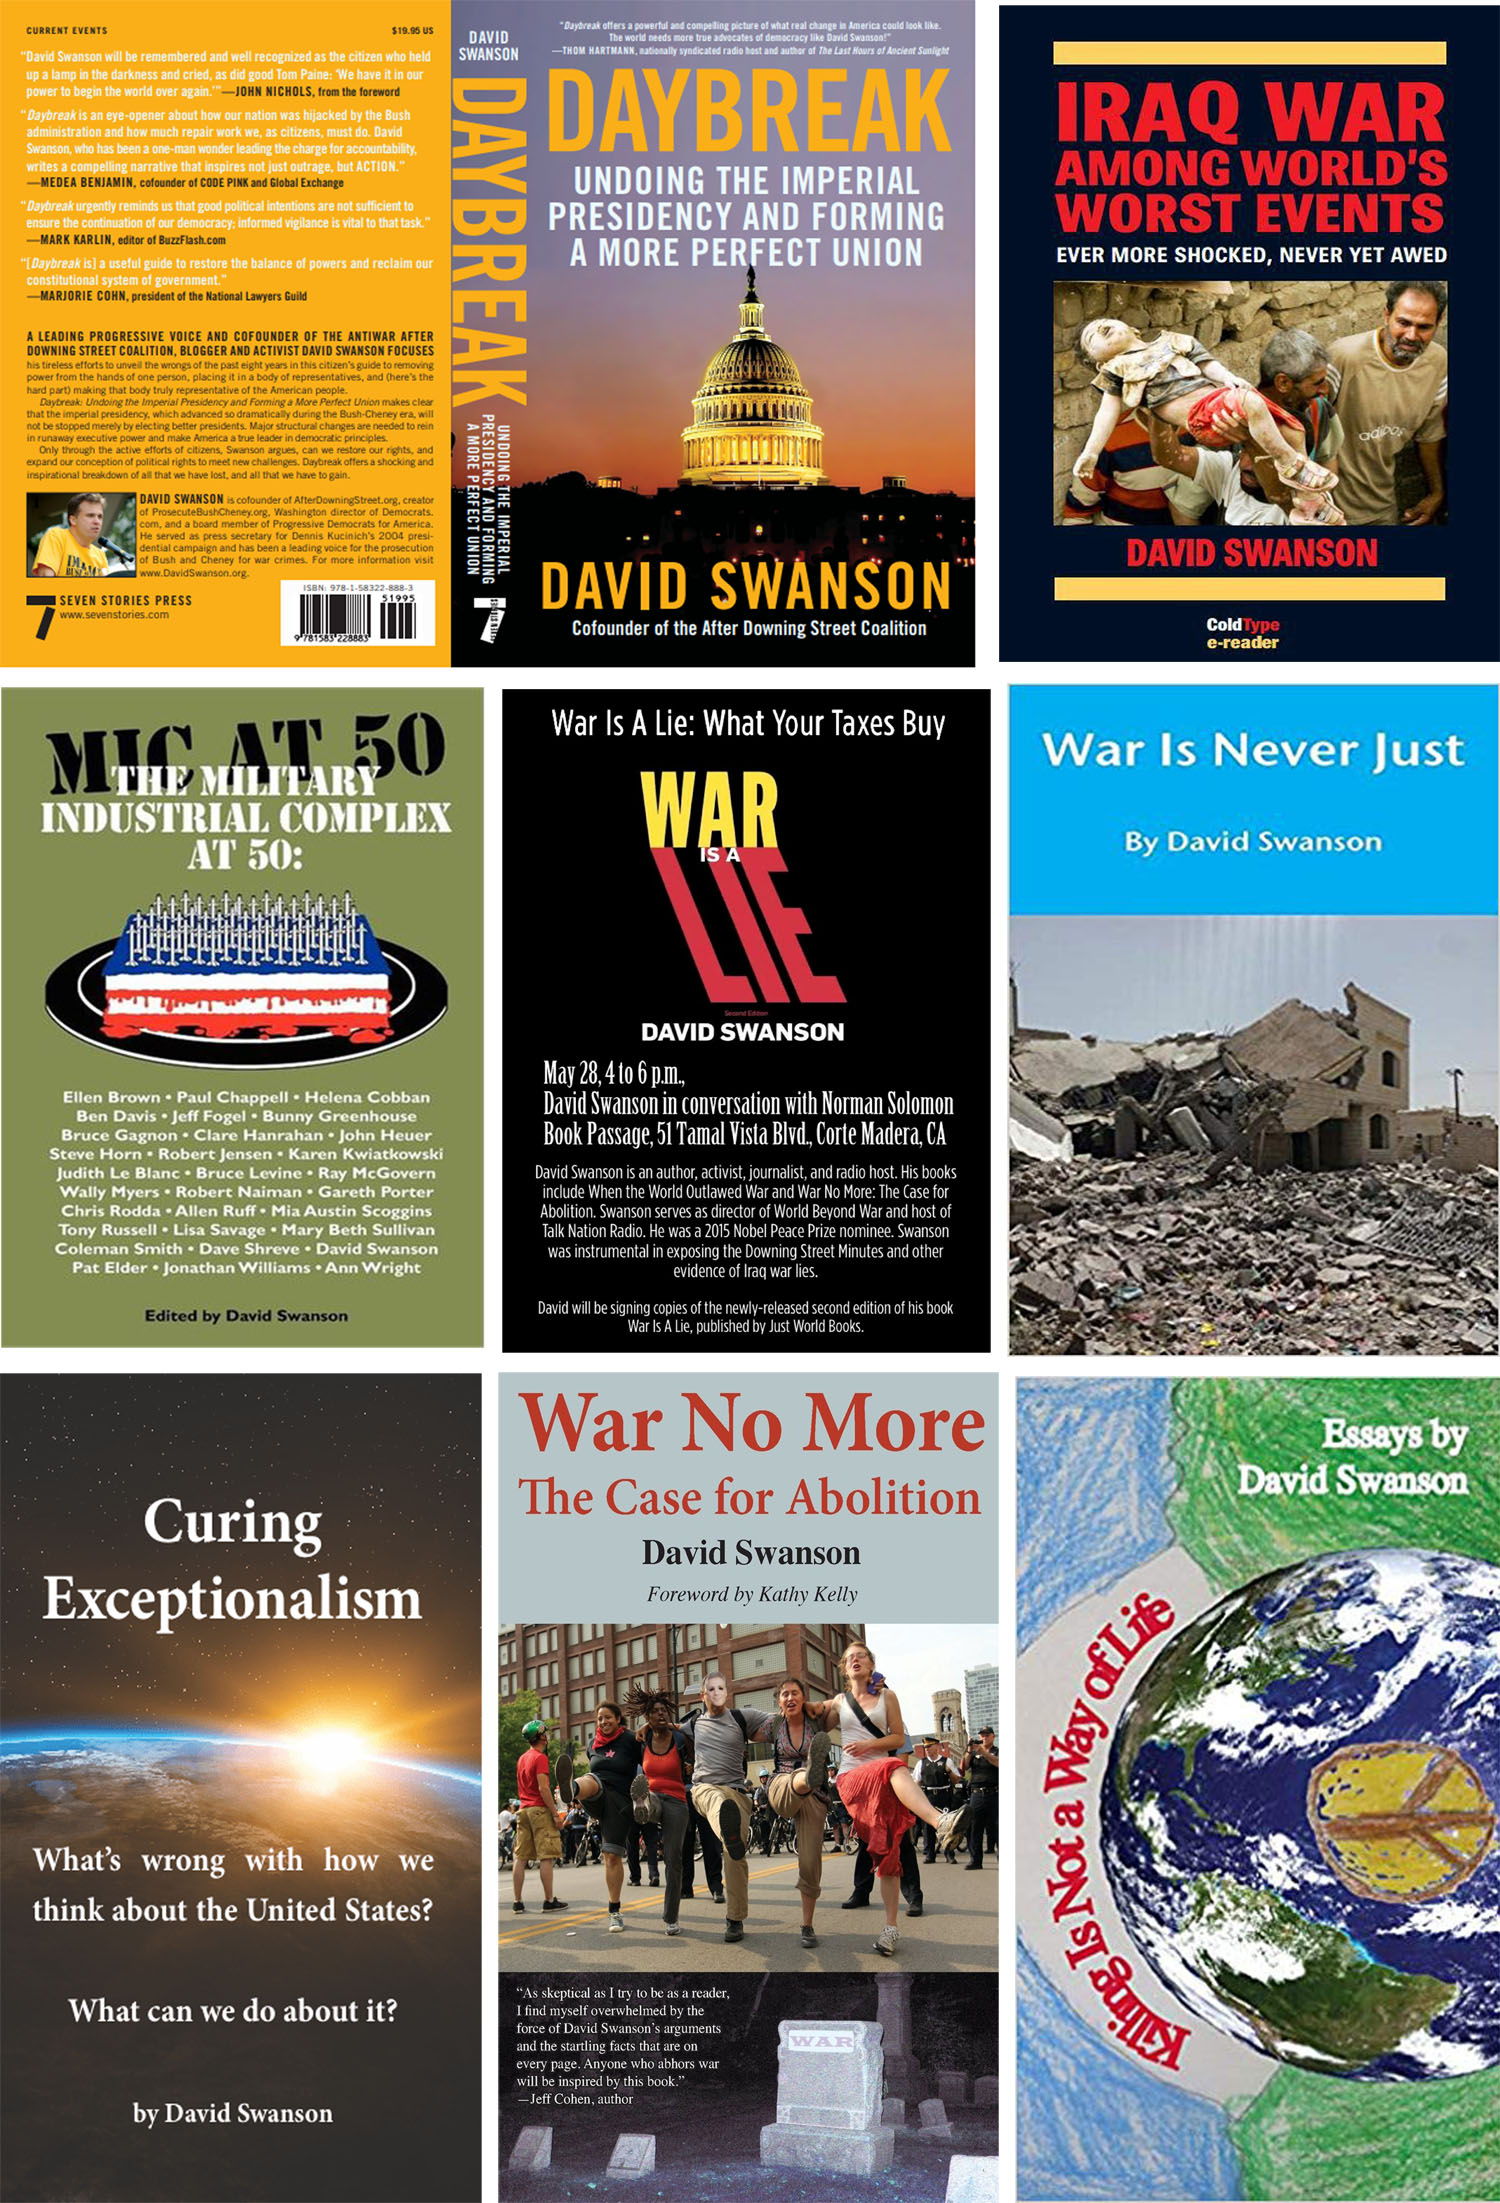 Some published books by David Swanson, Director of the World BEYOND War